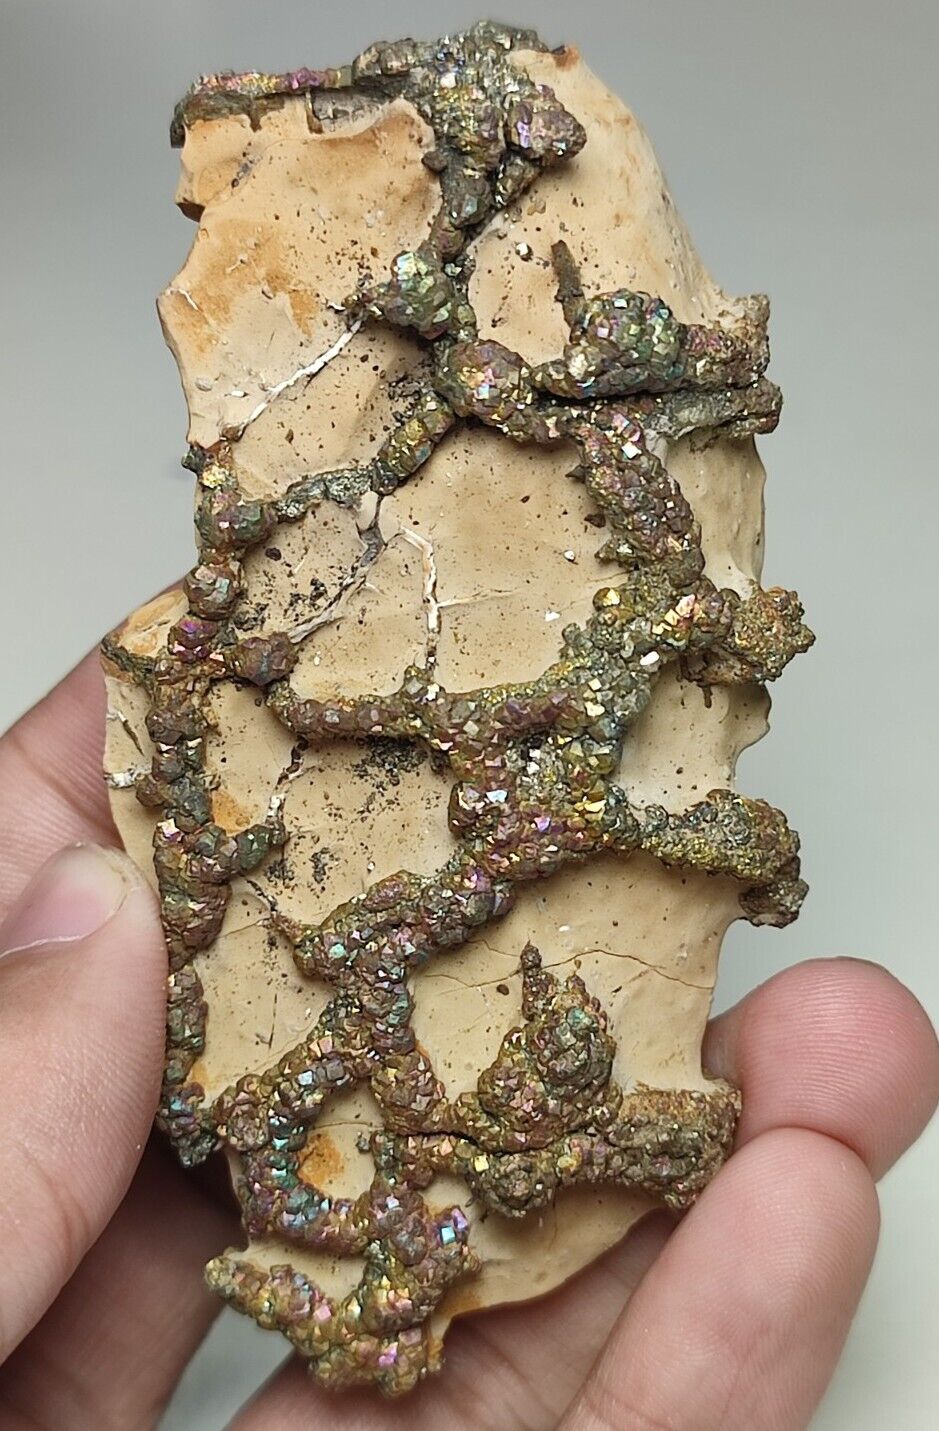 133-gm Iridescent Pyrite/Marcasite Beautiful Specimen With Complete Growth-Pak.